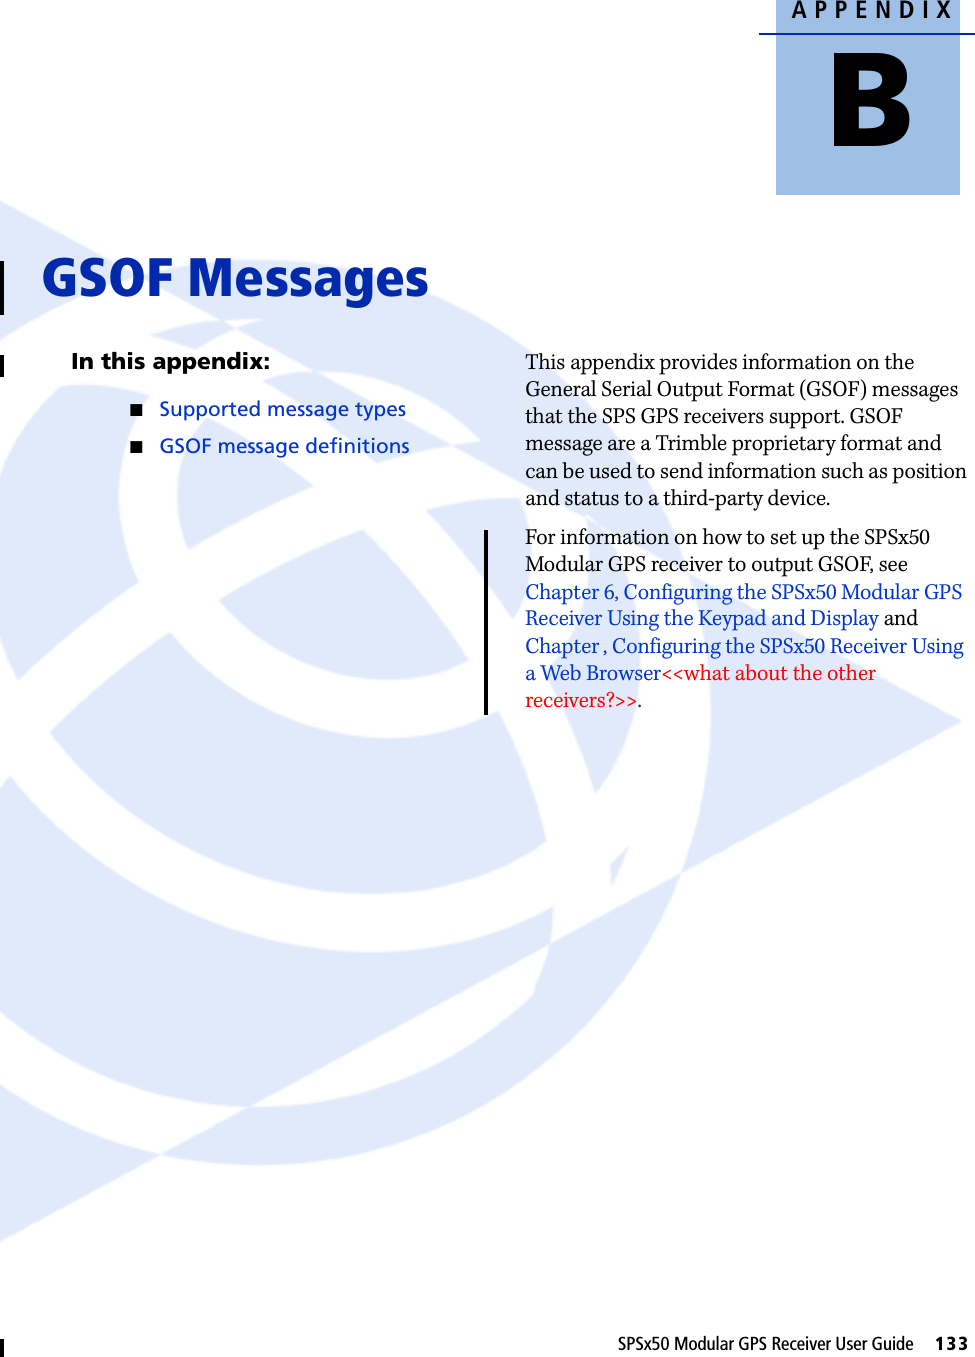 APPENDIXBSPSx50 Modular GPS Receiver User Guide     133GSOF Messages BIn this appendix:QSupported message typesQGSOF message definitionsThis appendix provides information on the General Serial Output Format (GSOF) messages that the SPS GPS receivers support. GSOF message are a Trimble proprietary format and can be used to send information such as position and status to a third-party device.For information on how to set up the SPSx50 Modular GPS receiver to output GSOF, see Chapter 6, Configuring the SPSx50 Modular GPS Receiver Using the Keypad and Display and Chapter , Configuring the SPSx50 Receiver Using a Web Browser&lt;&lt;what about the other receivers?&gt;&gt;.